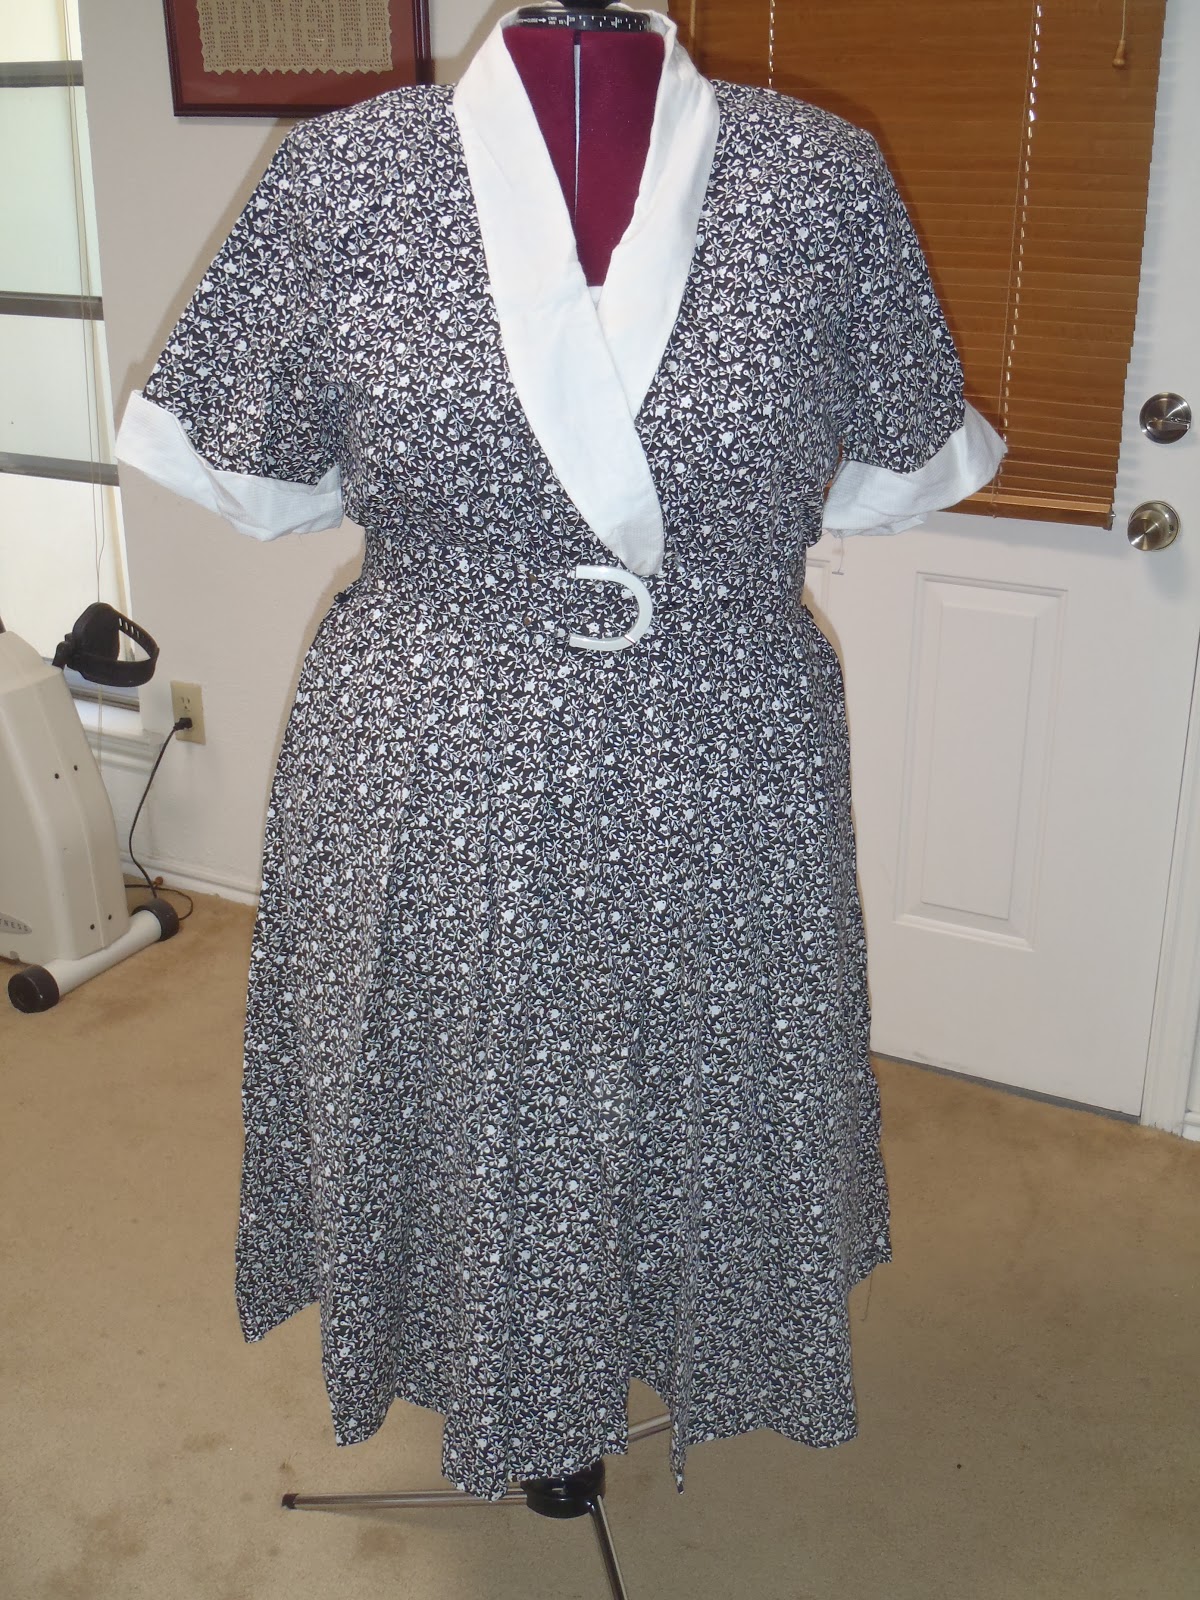 Ramblings from a Housewife: New Dresses!!!! And a Brief History of the ...